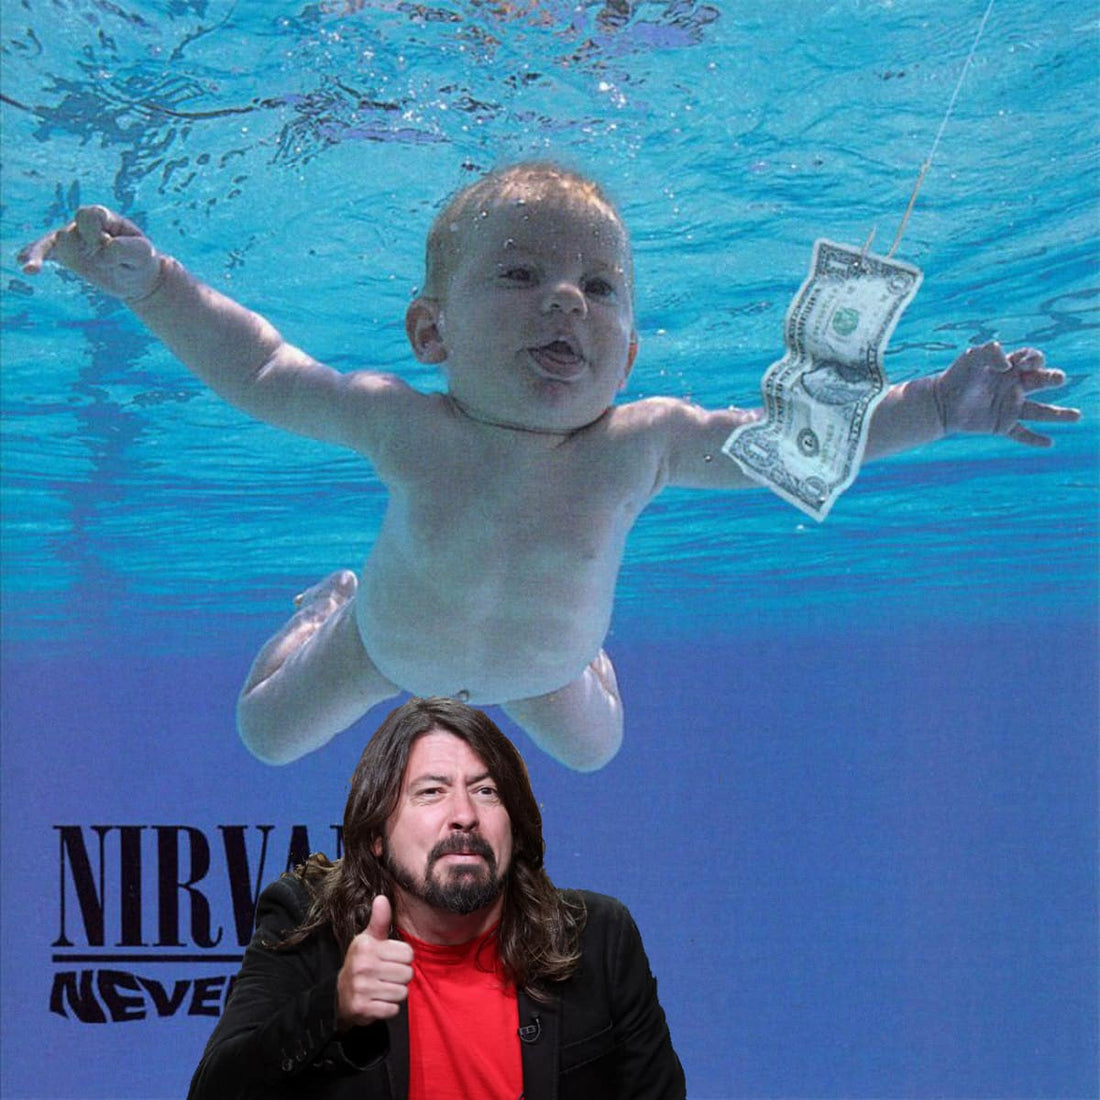 Dave Grohl  on the 'Nevermind' baby lawsuit Official Merchandise Store